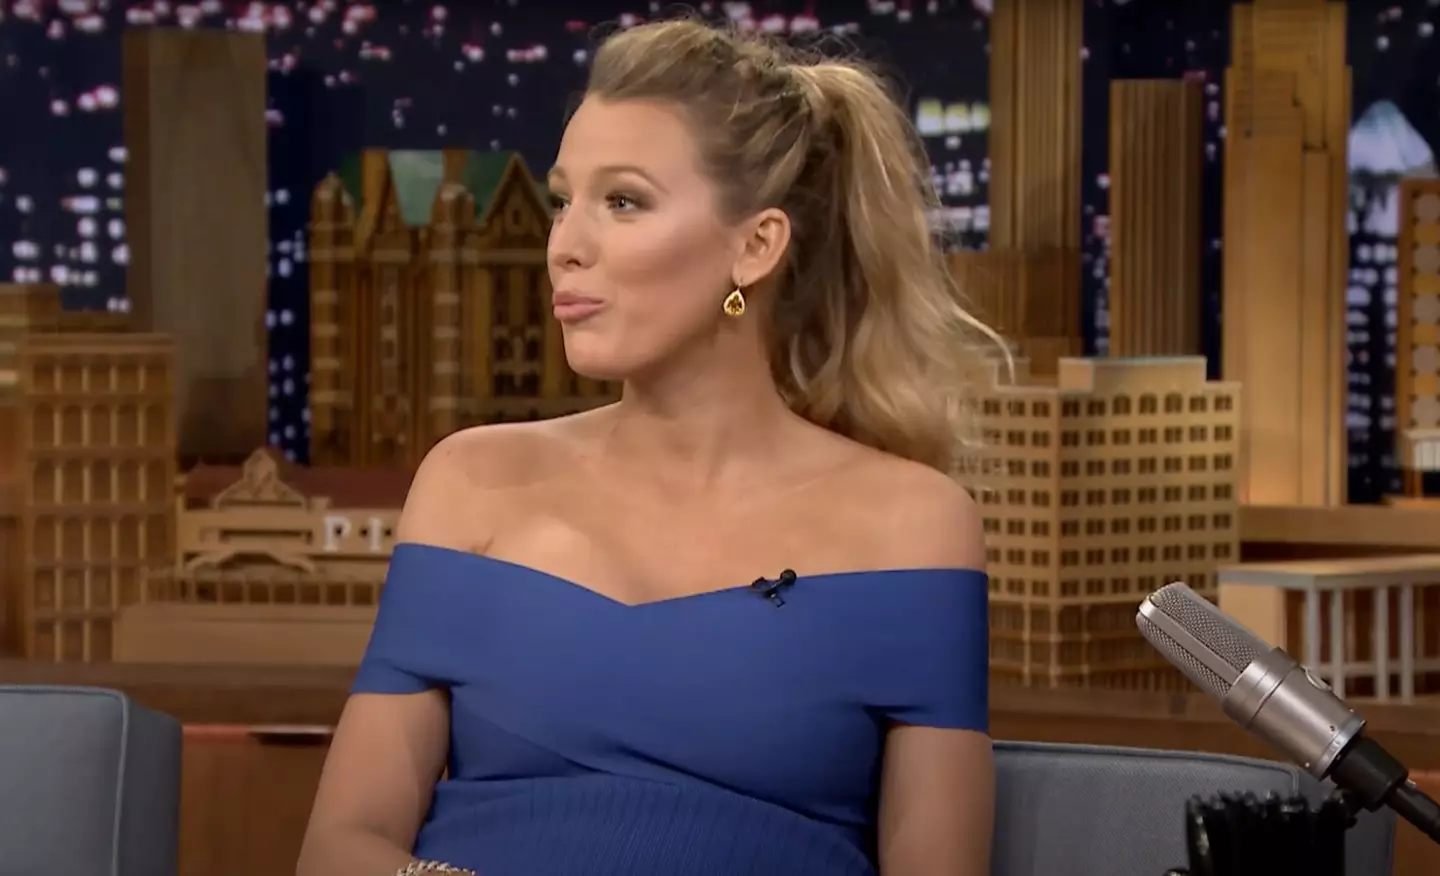 Blake Lively once opened up about one of her husband's crude scenes in Deadpool.